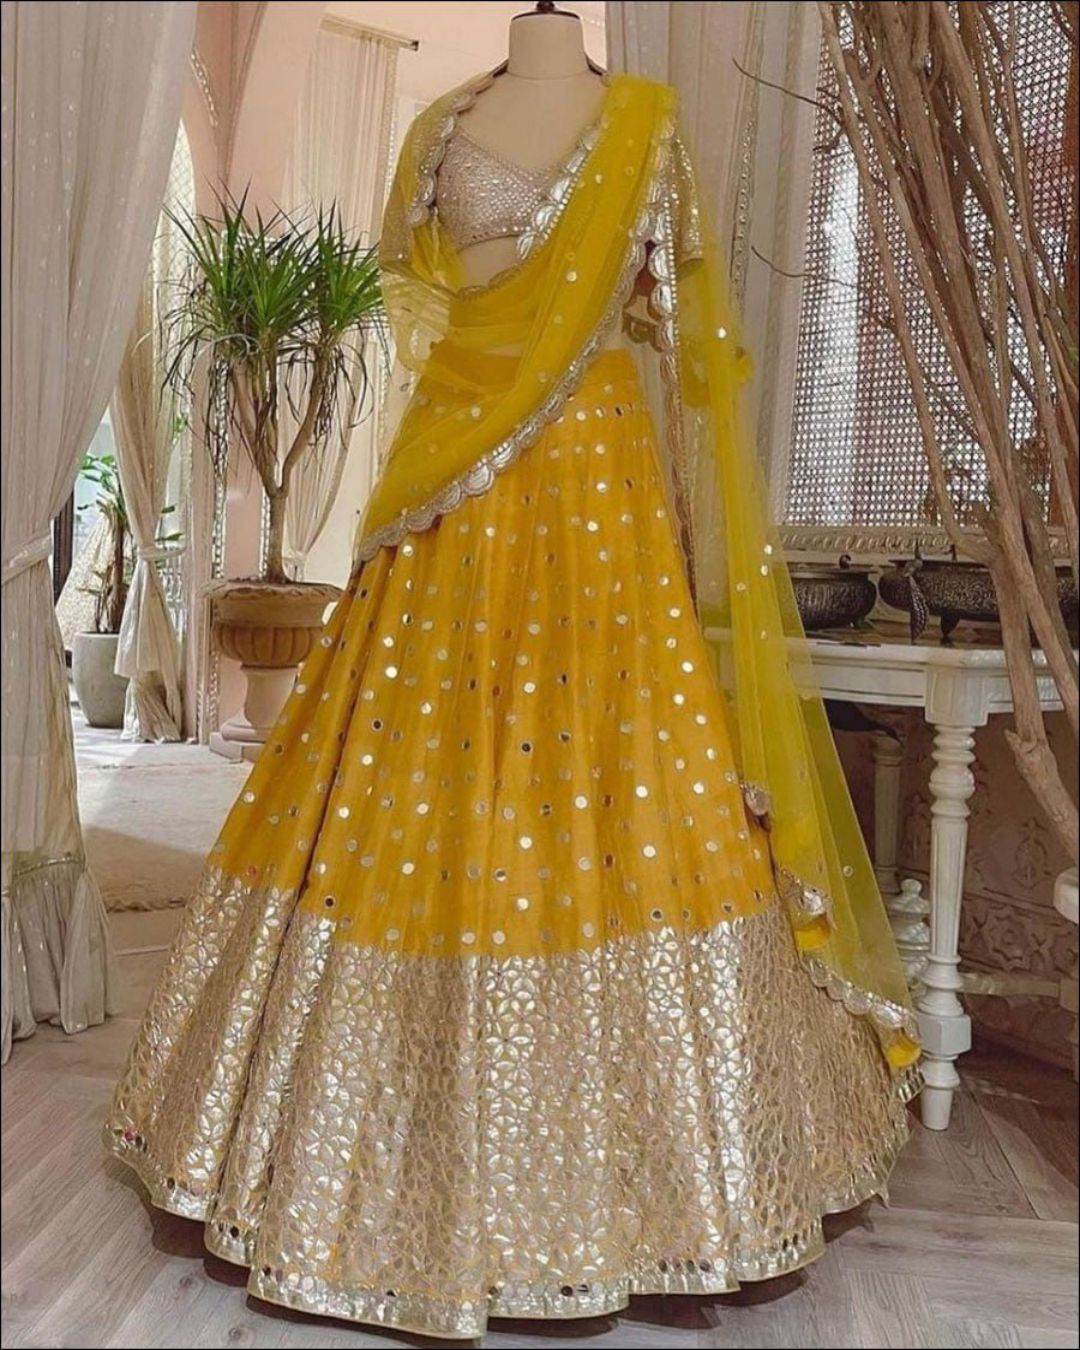 Picco Ricco - NEW ARRIVAL WEDDING ADDITION 💛Yellow Mirror Work Lehenga  Choli 💛Look amazing adorning this yellow lehenga in georgette material  embellished with mirror work. 💛Lehenga paired with similar color choli with